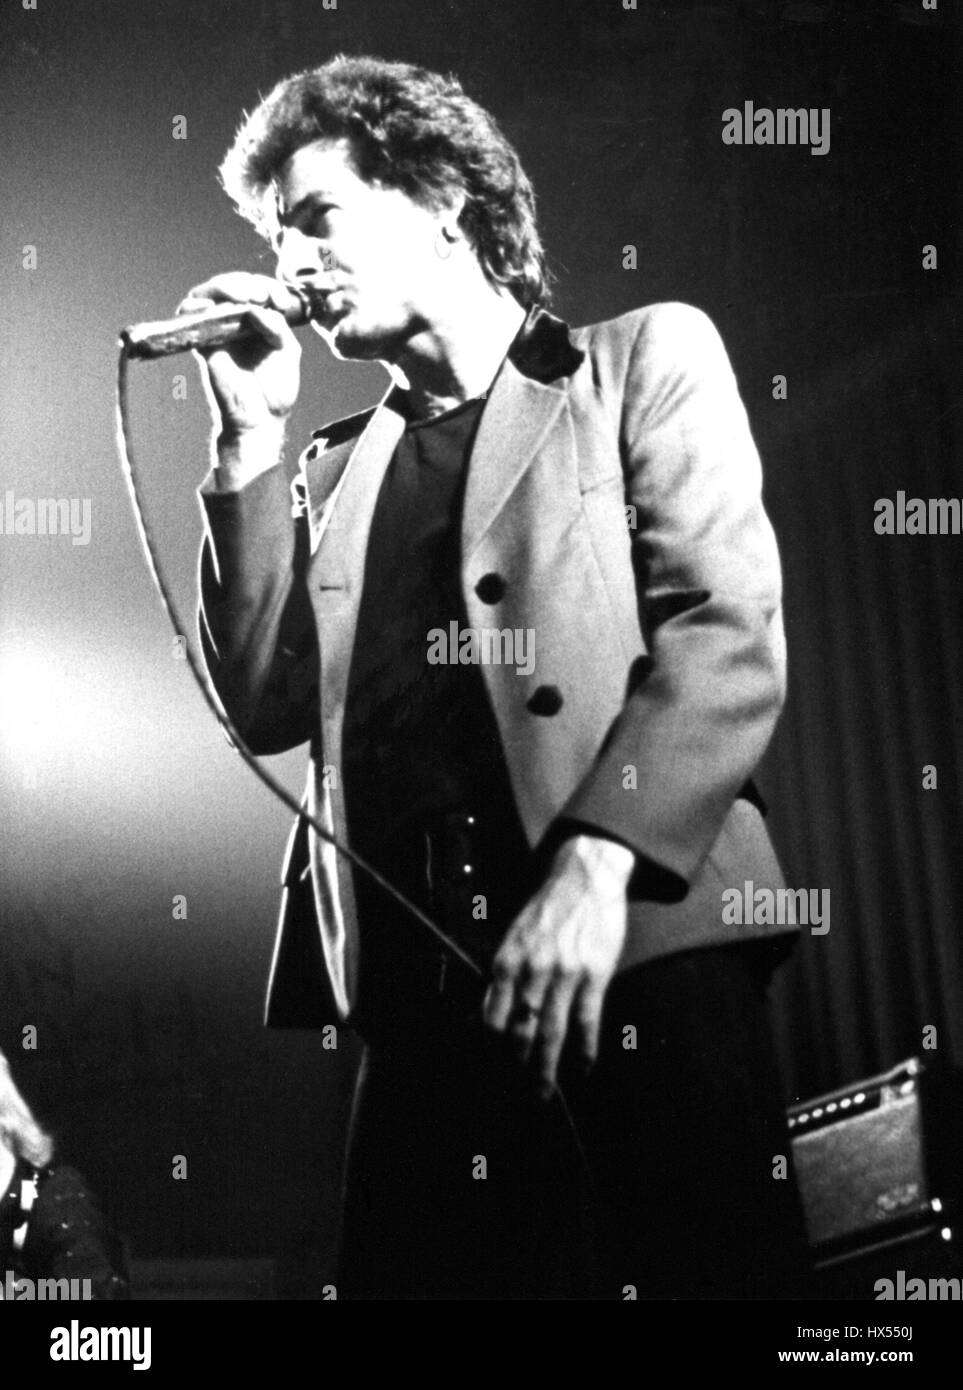 Chris Turner, Lead singer of British power pop band Tonight, performa live on stage in London, England on June 6, 1978. Stock Photo